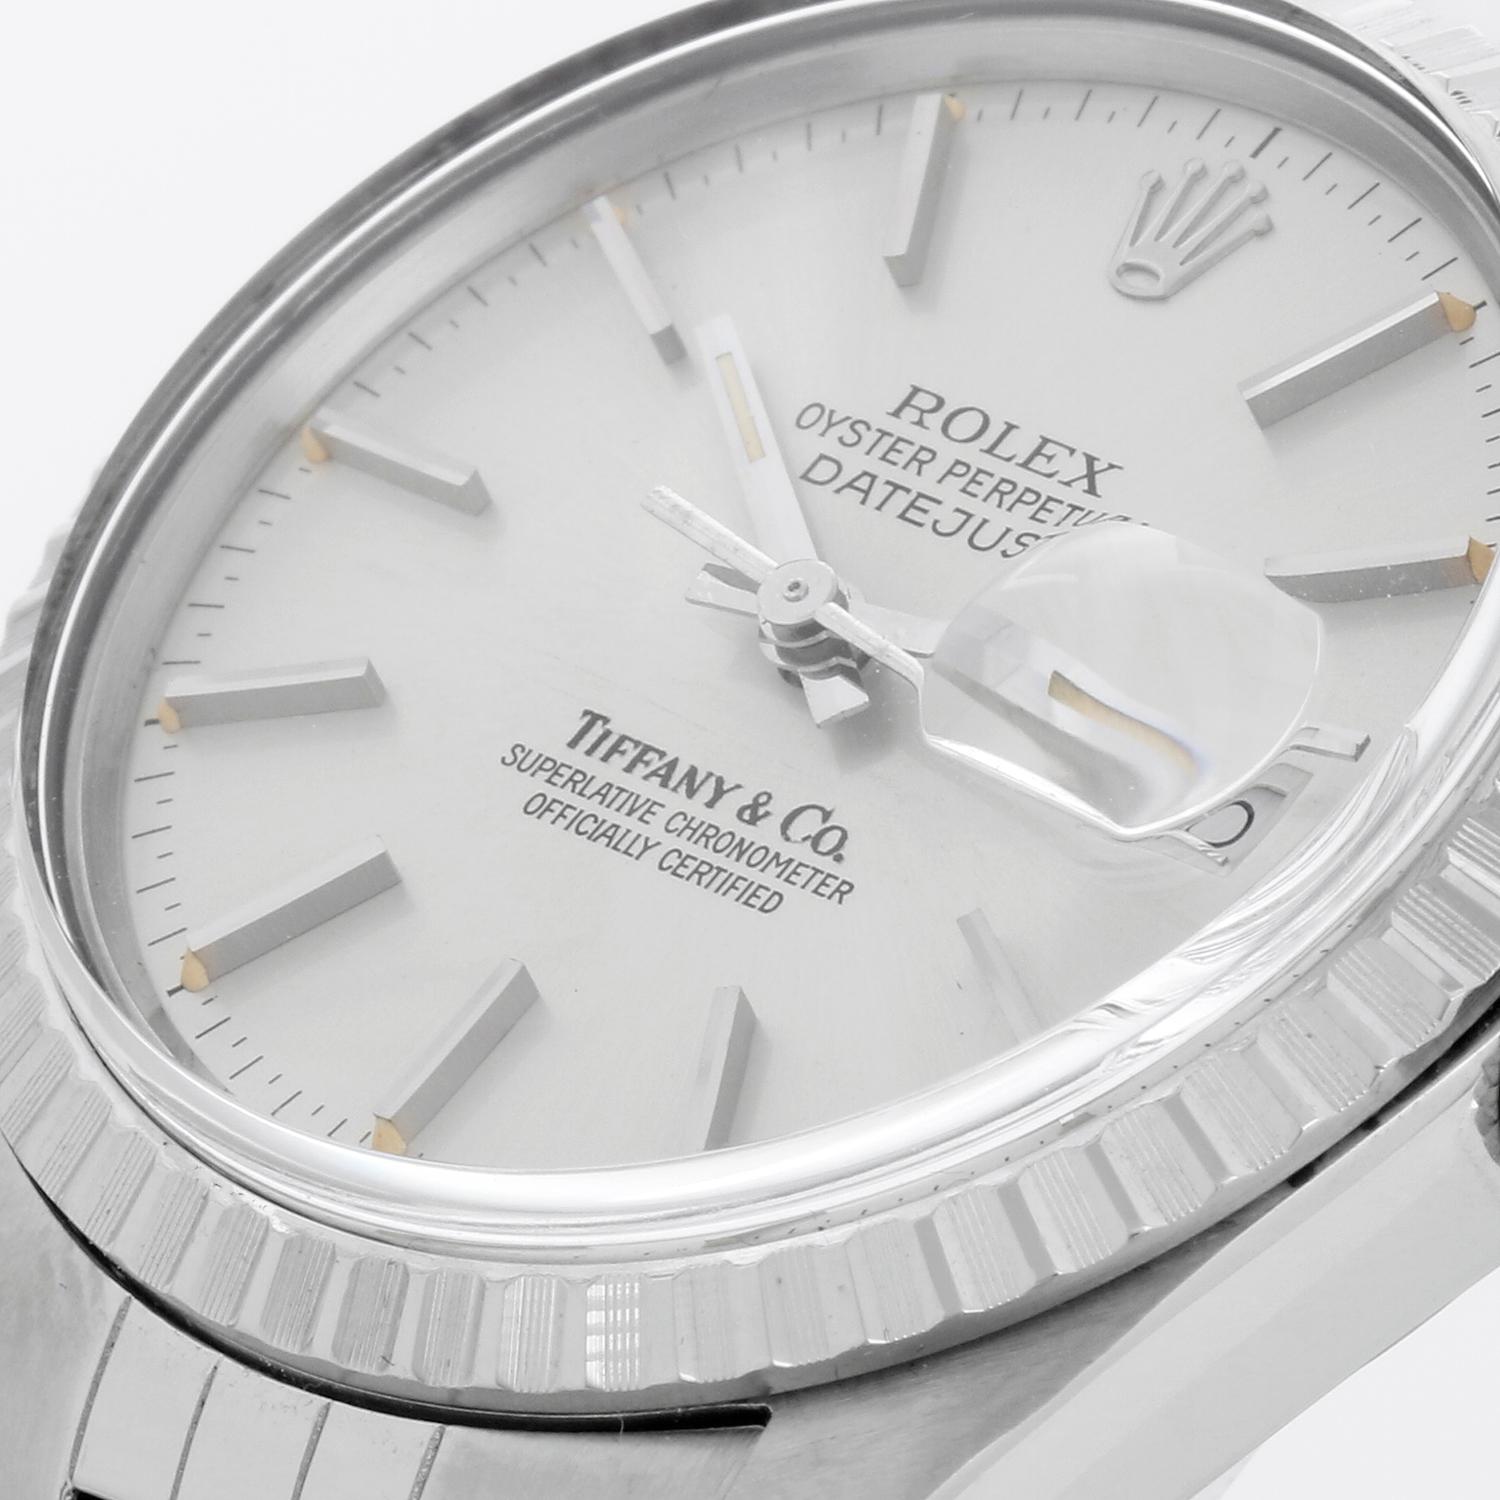 Rolex Datejust Men's Steel Tiffany & Co. Watch 16030 - Automatic winding with date; acrylic crystal. Stainless steel case with engine turned bezel (36mm diameter). Silver dial with stick hour markers signed Tiffany & Co.. Stainless steel Jubilee